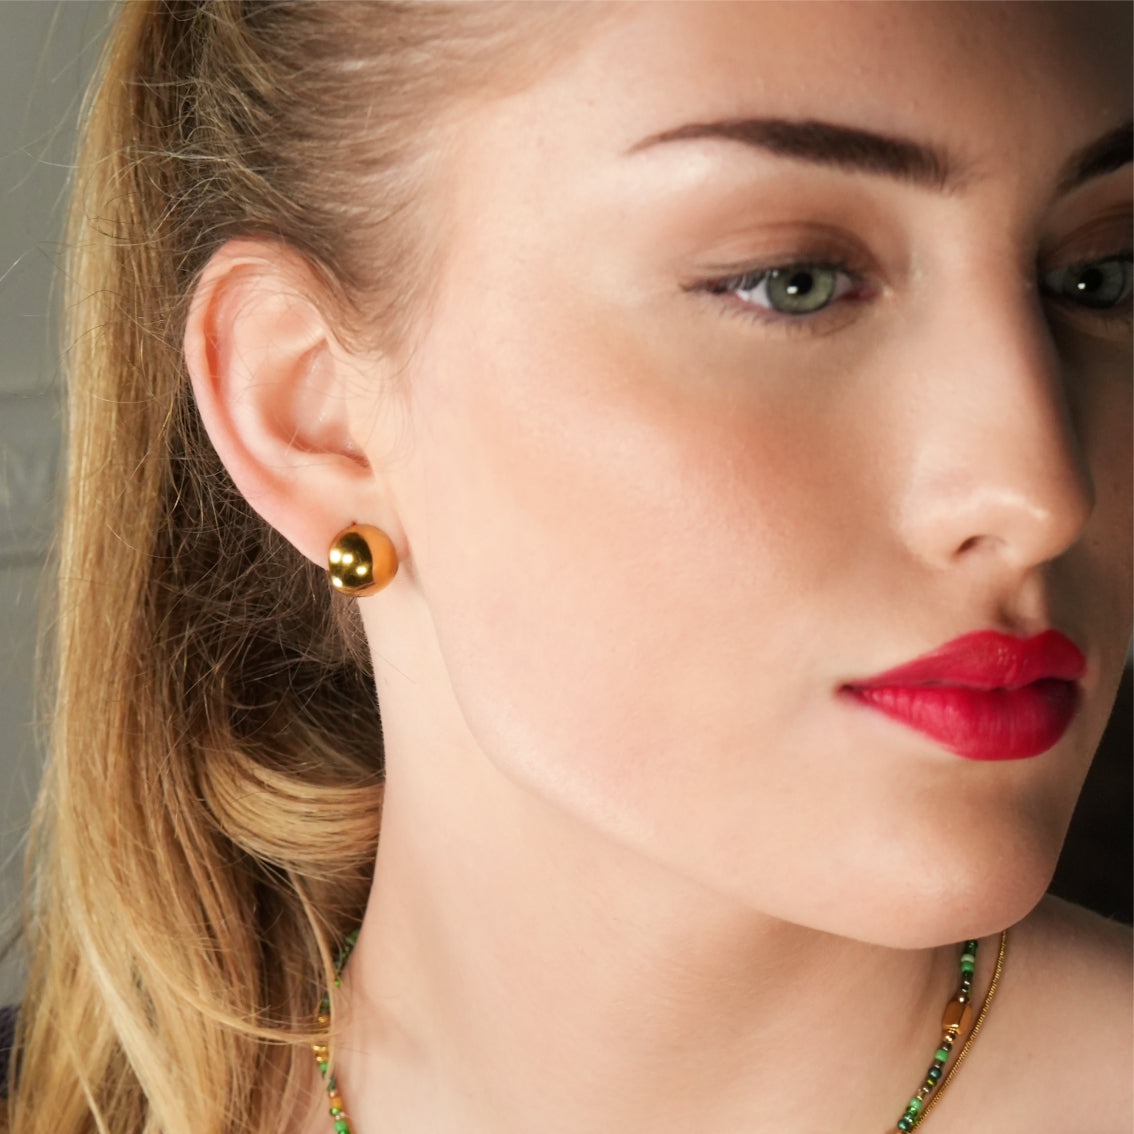 4mm bead stud earrings - 10K yellow Gold. Color: yellow | Doucet Latendresse